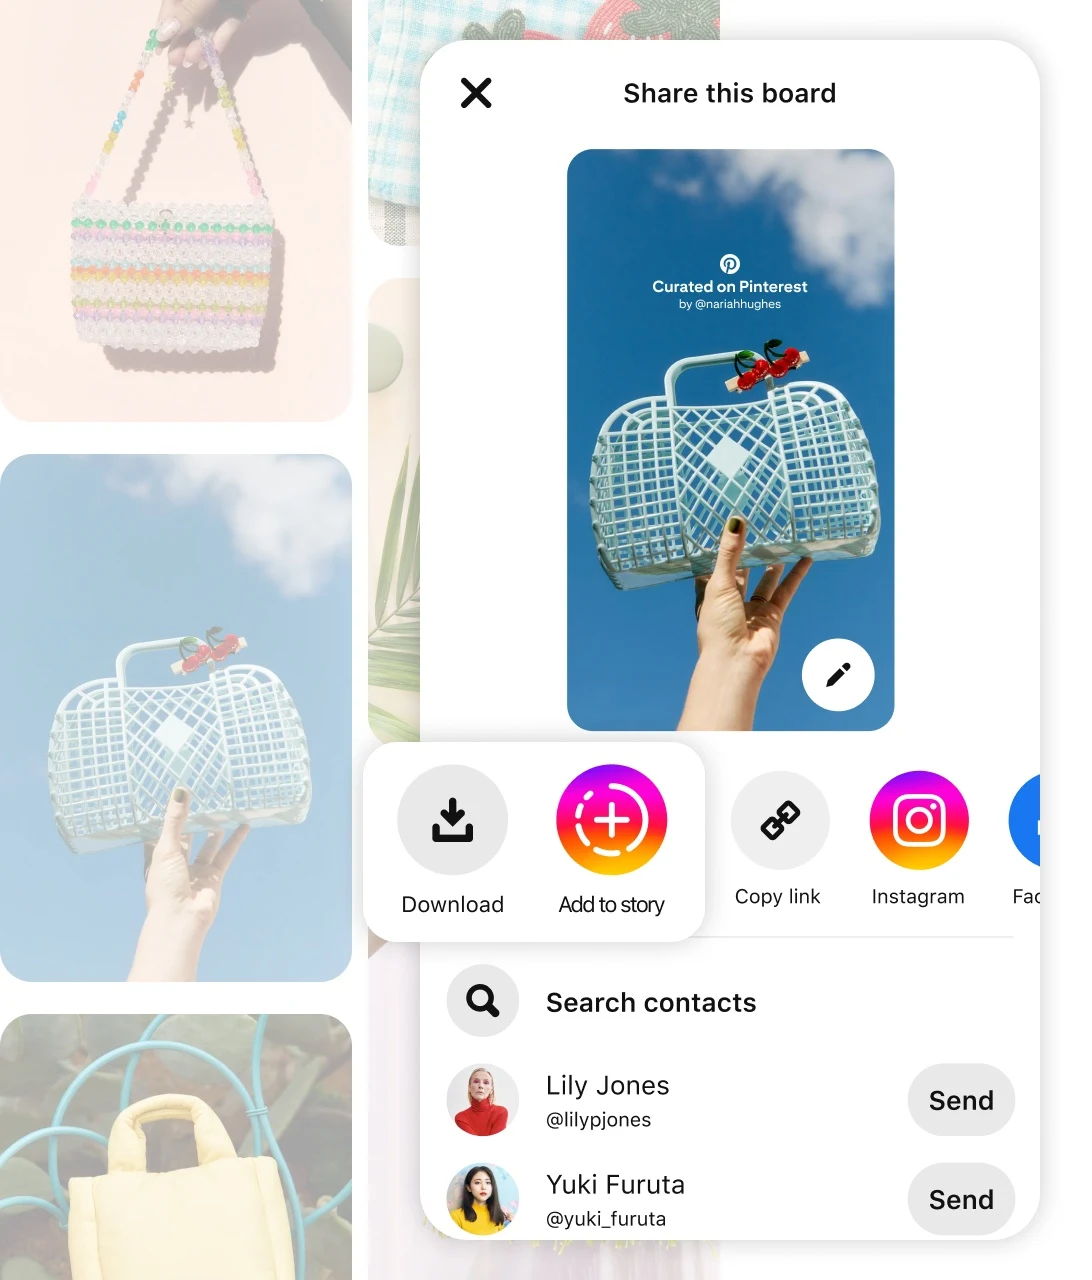 Pin grid including various purses with demo Pinterest app screen prompting to "Share this board"